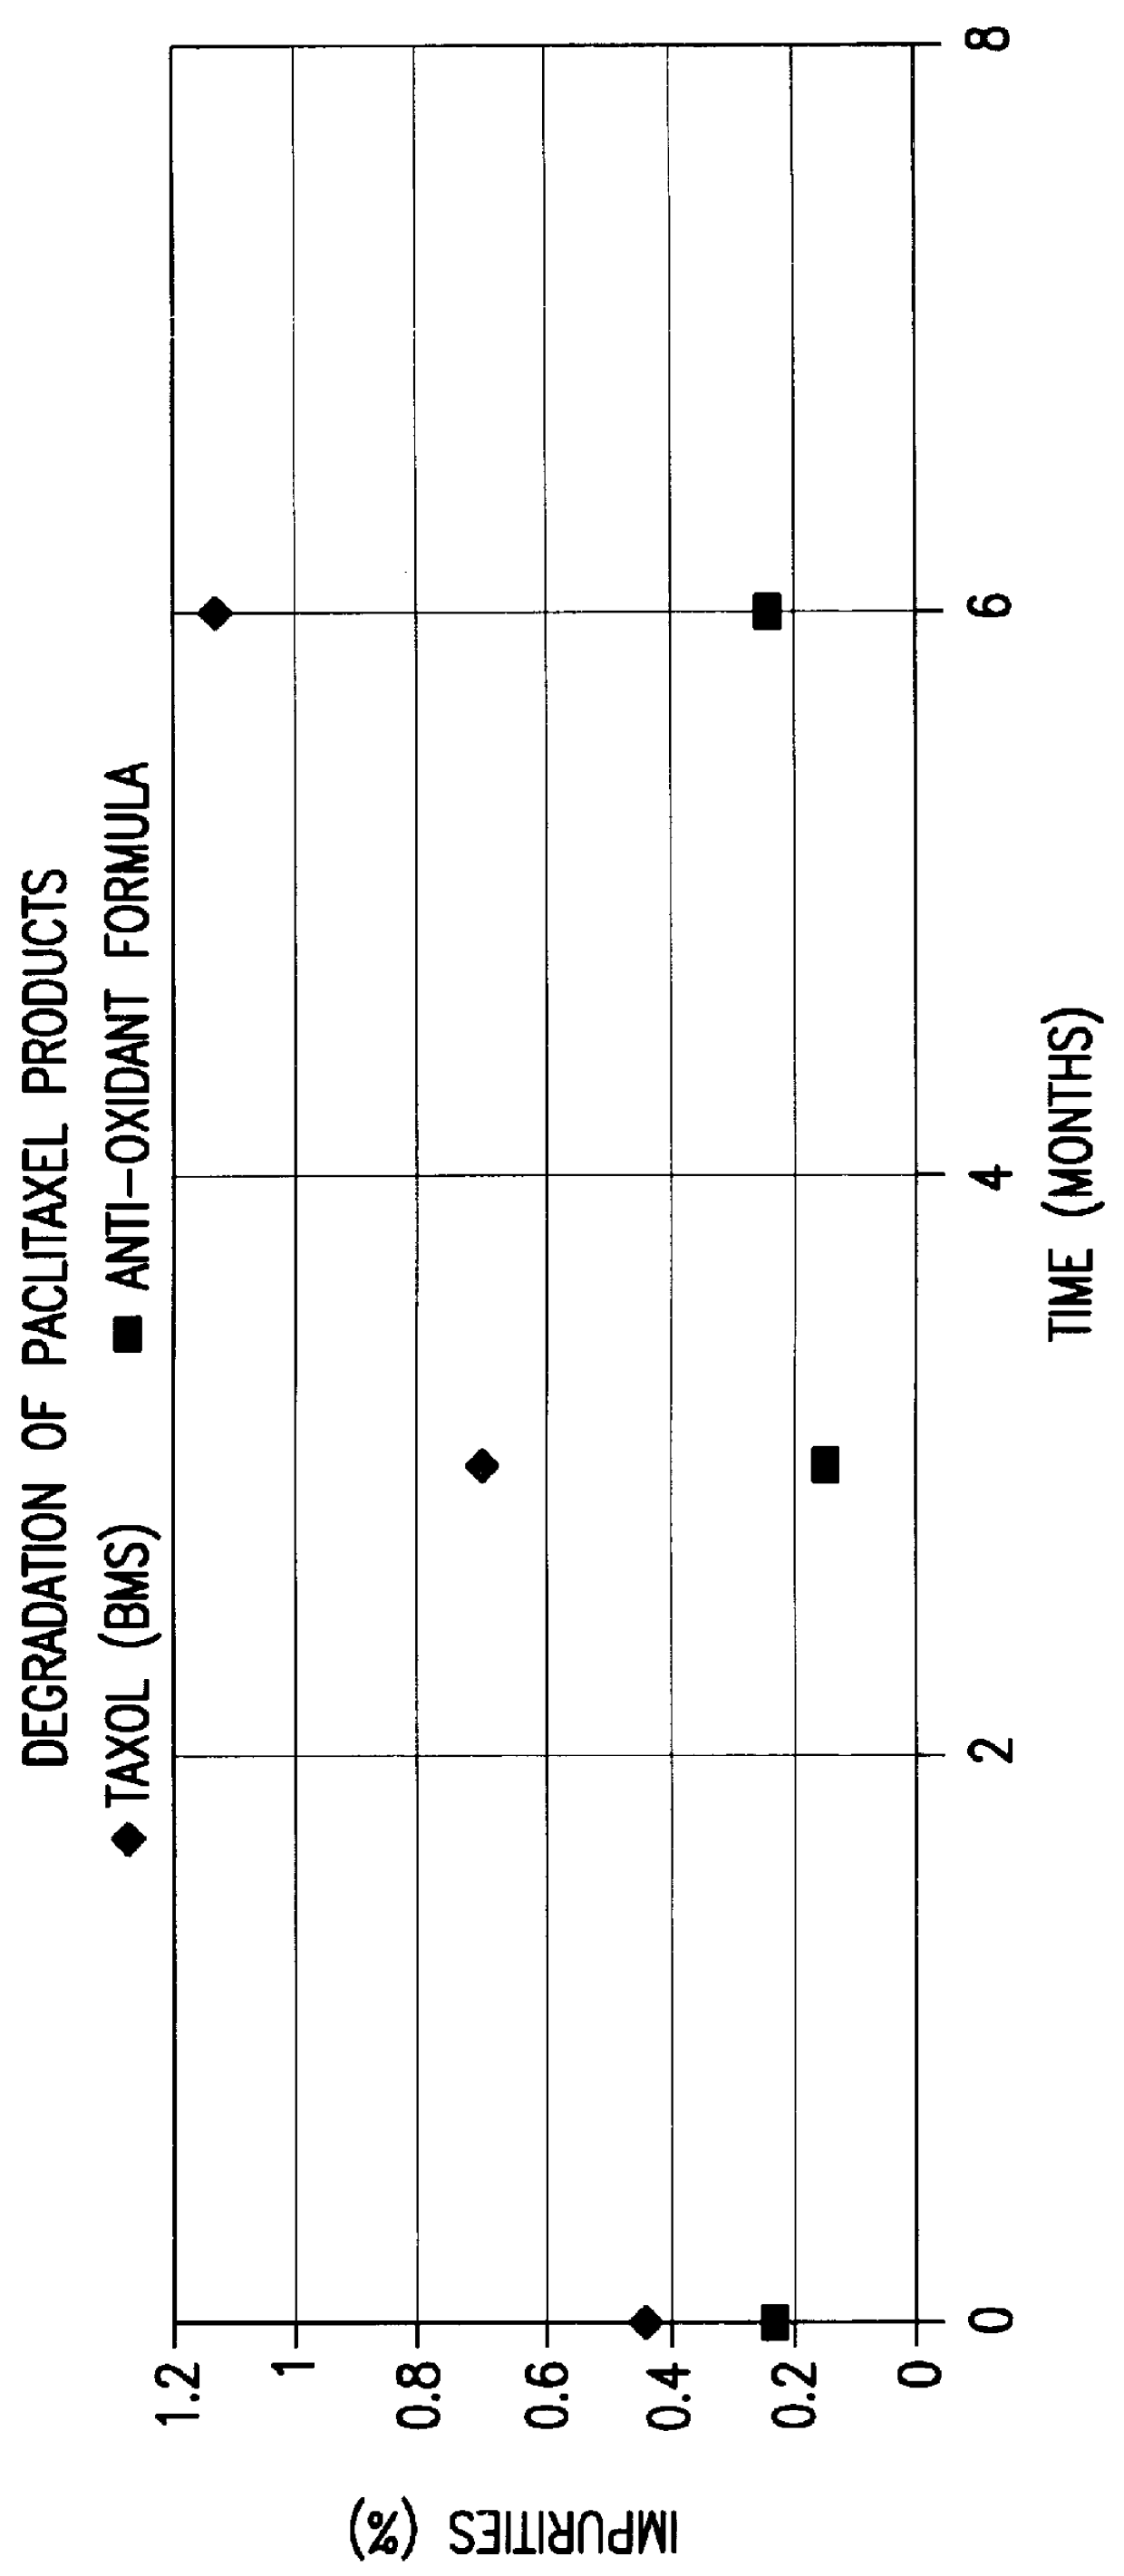 Stabilized injectable pharmaceutical compositions containing taxoid anti-neoplastic agents